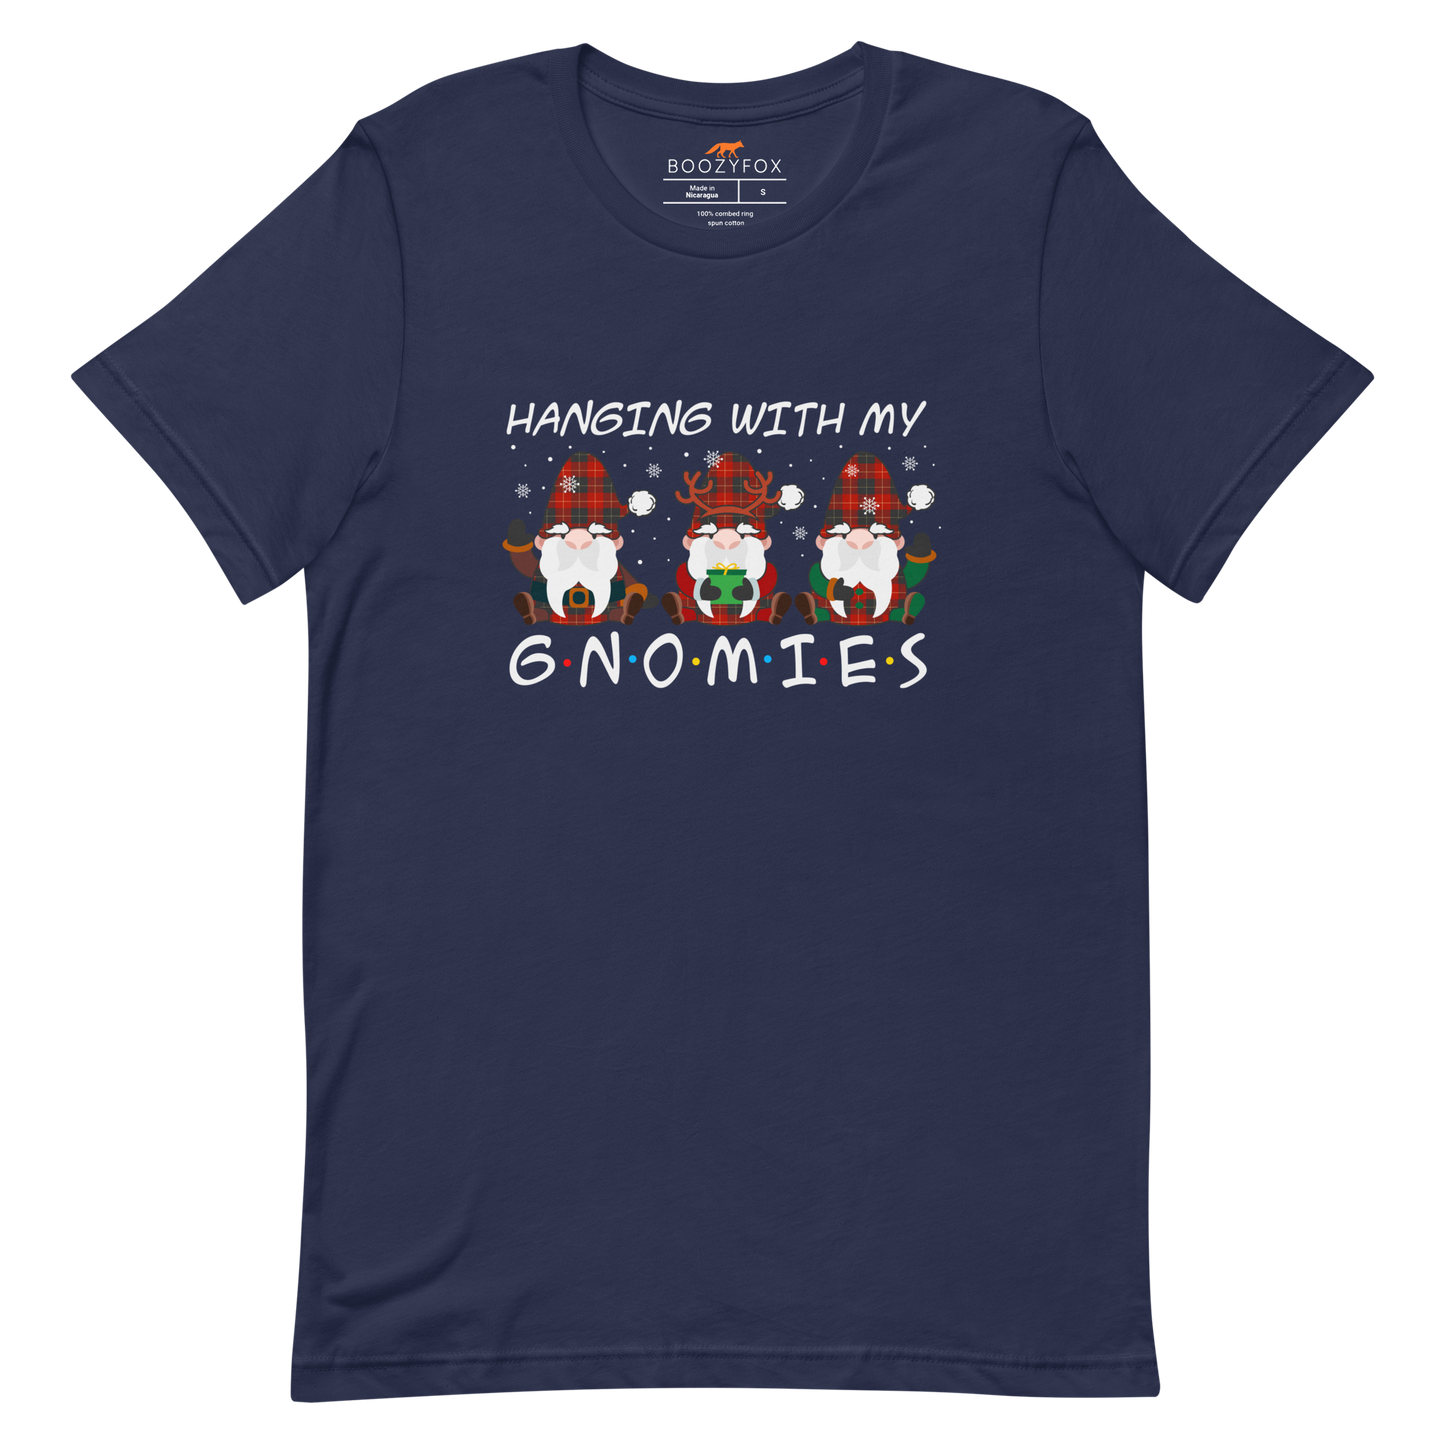 Navy Premium Christmas Gnome Tee featuring a delight Hanging With My Gnomies graphic on the chest - Funny Christmas Graphic Gnome Tees - Boozy Fox